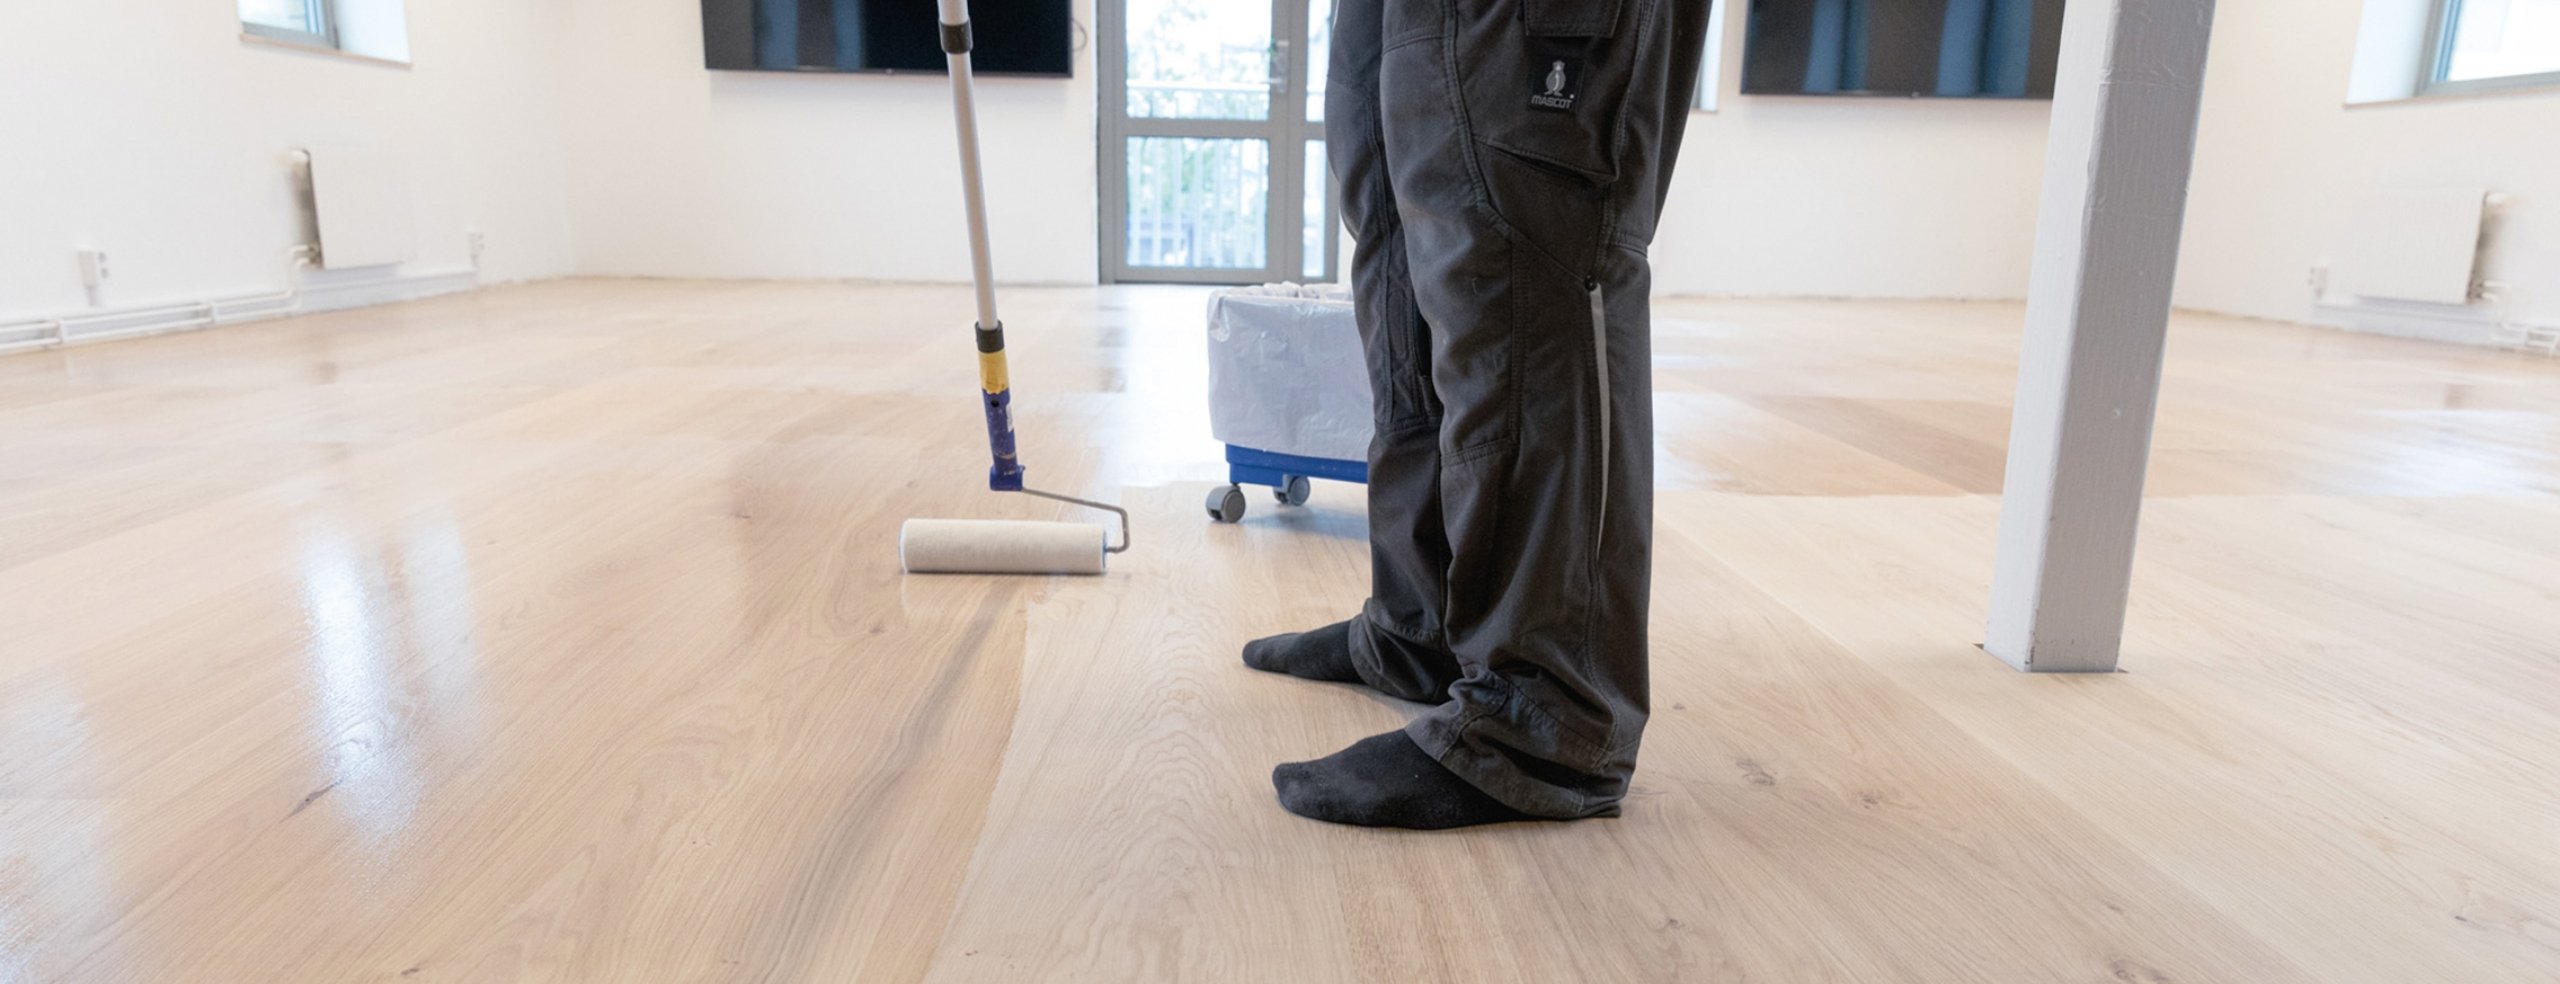 Water-based Floor Sealers & Finishes 